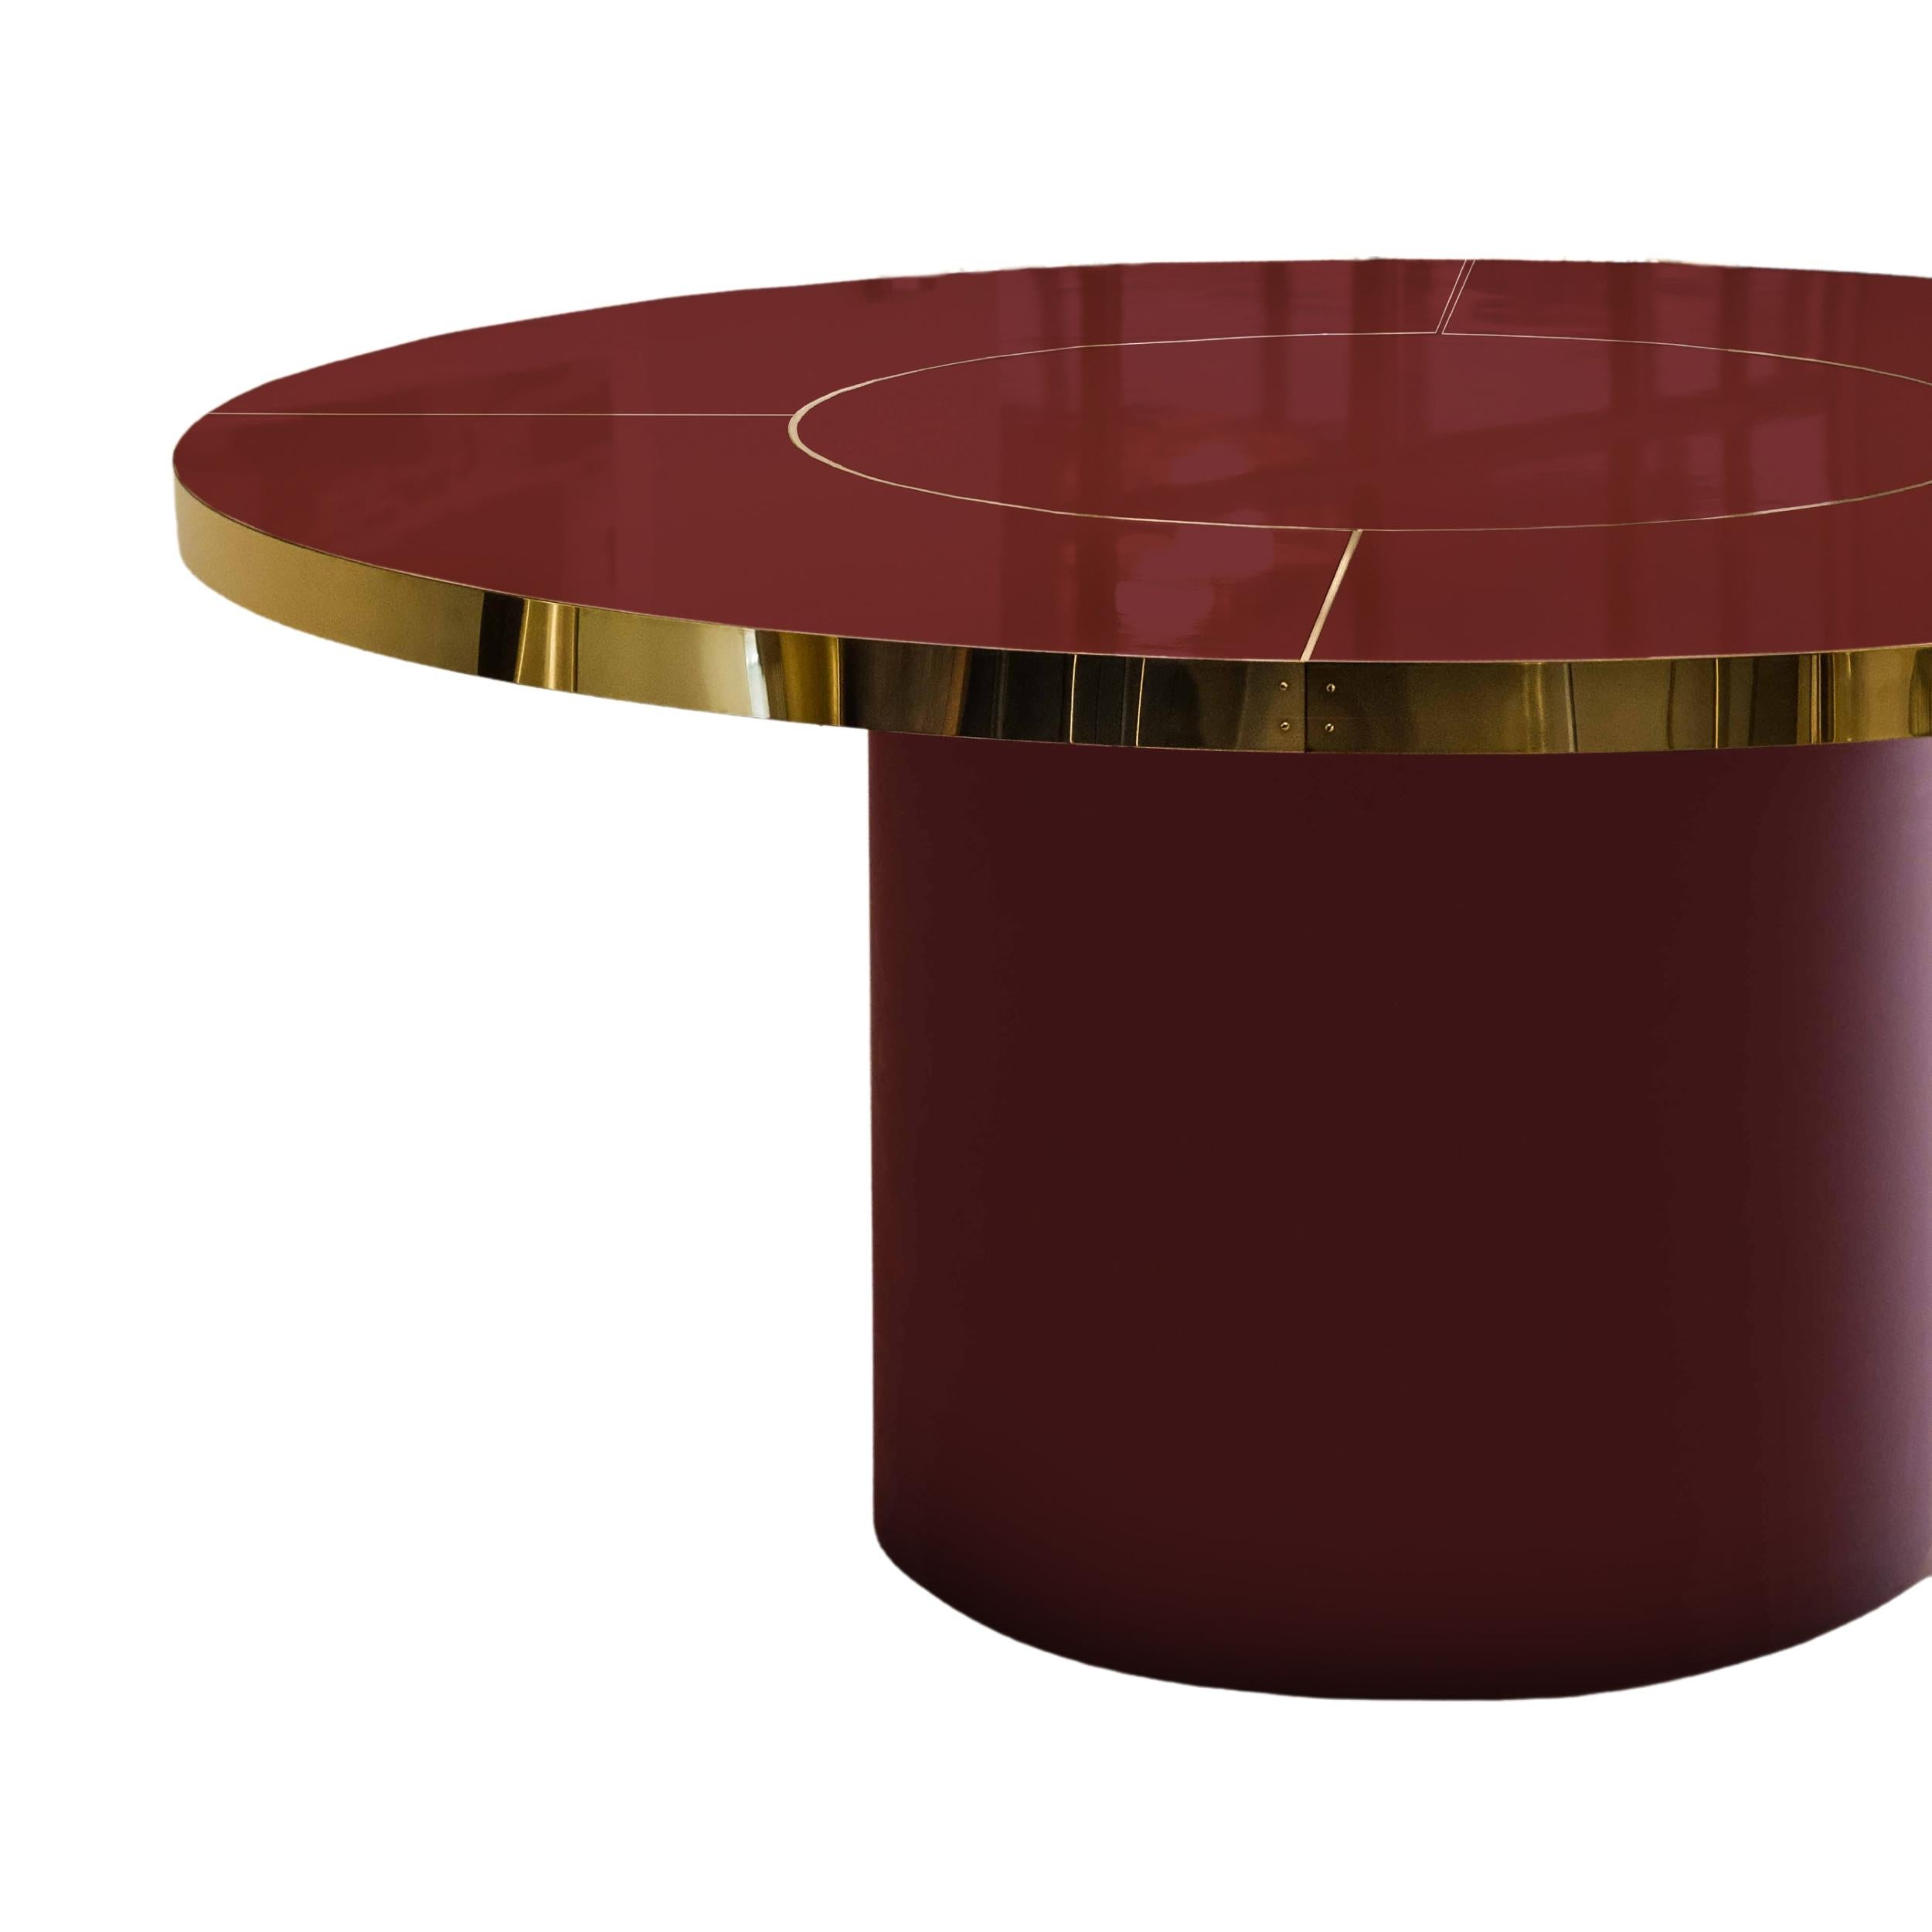 Retro Design Round Dining Table Palm Springs Style High Gloss Laminated & Satin Steel Details L Size

Discover our incredible collection of retro-style design tables inspired by the iconic decoration of the 1950s, 60s, and 70s of Palm Springs in